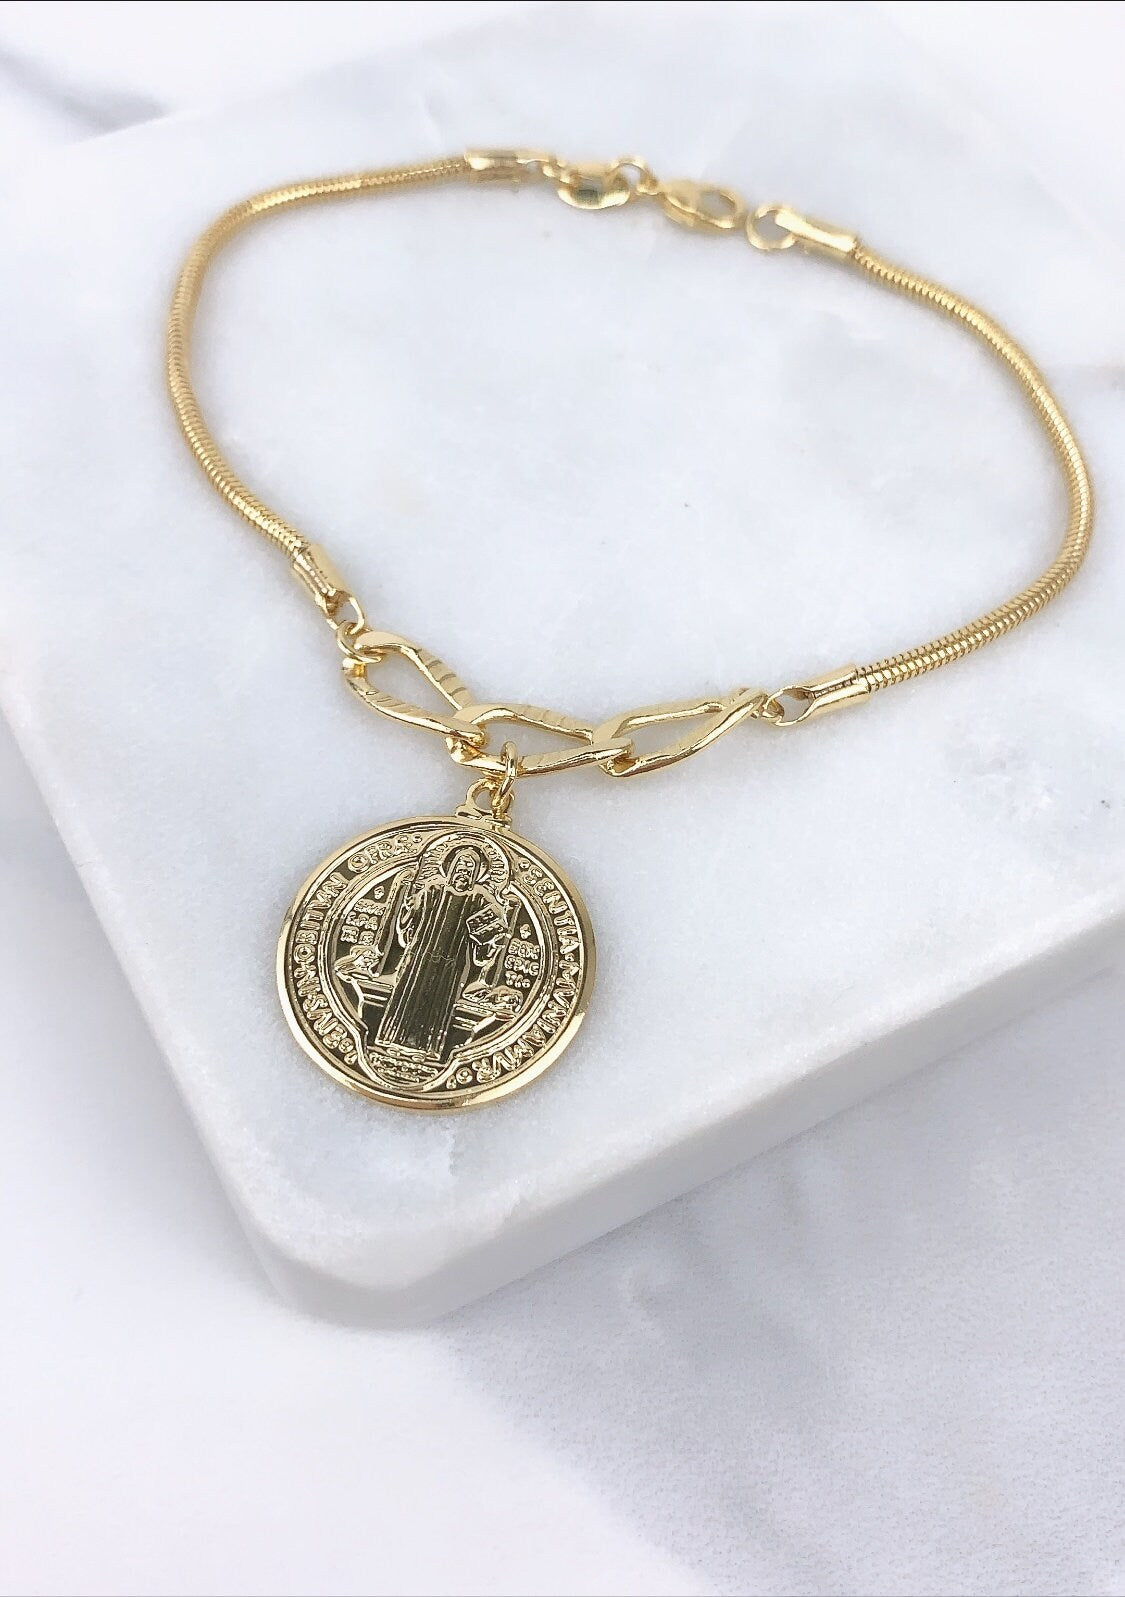 18k Gold Filled 8 inches Snake Chain Saint Benedict Coin Charm Chain Link, Bracelet  For Wholesale and Jewelry Supplies